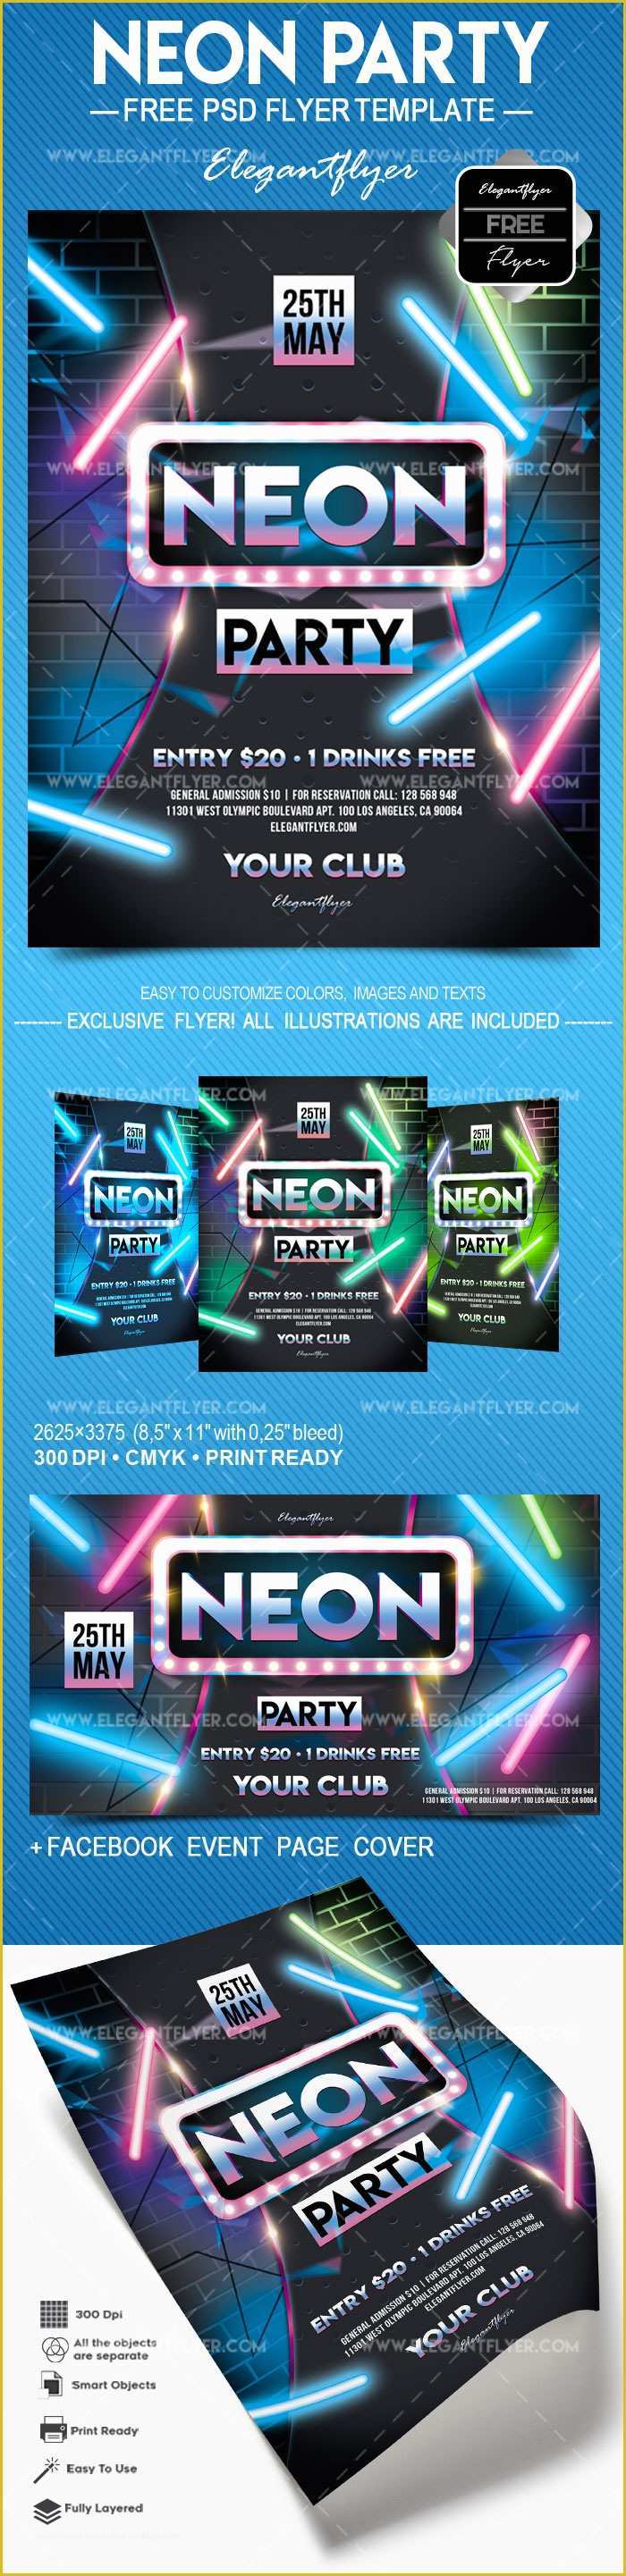 Neon Party Flyer Template Free Of Neon Party – Free Flyer Psd Template – by Elegantflyer